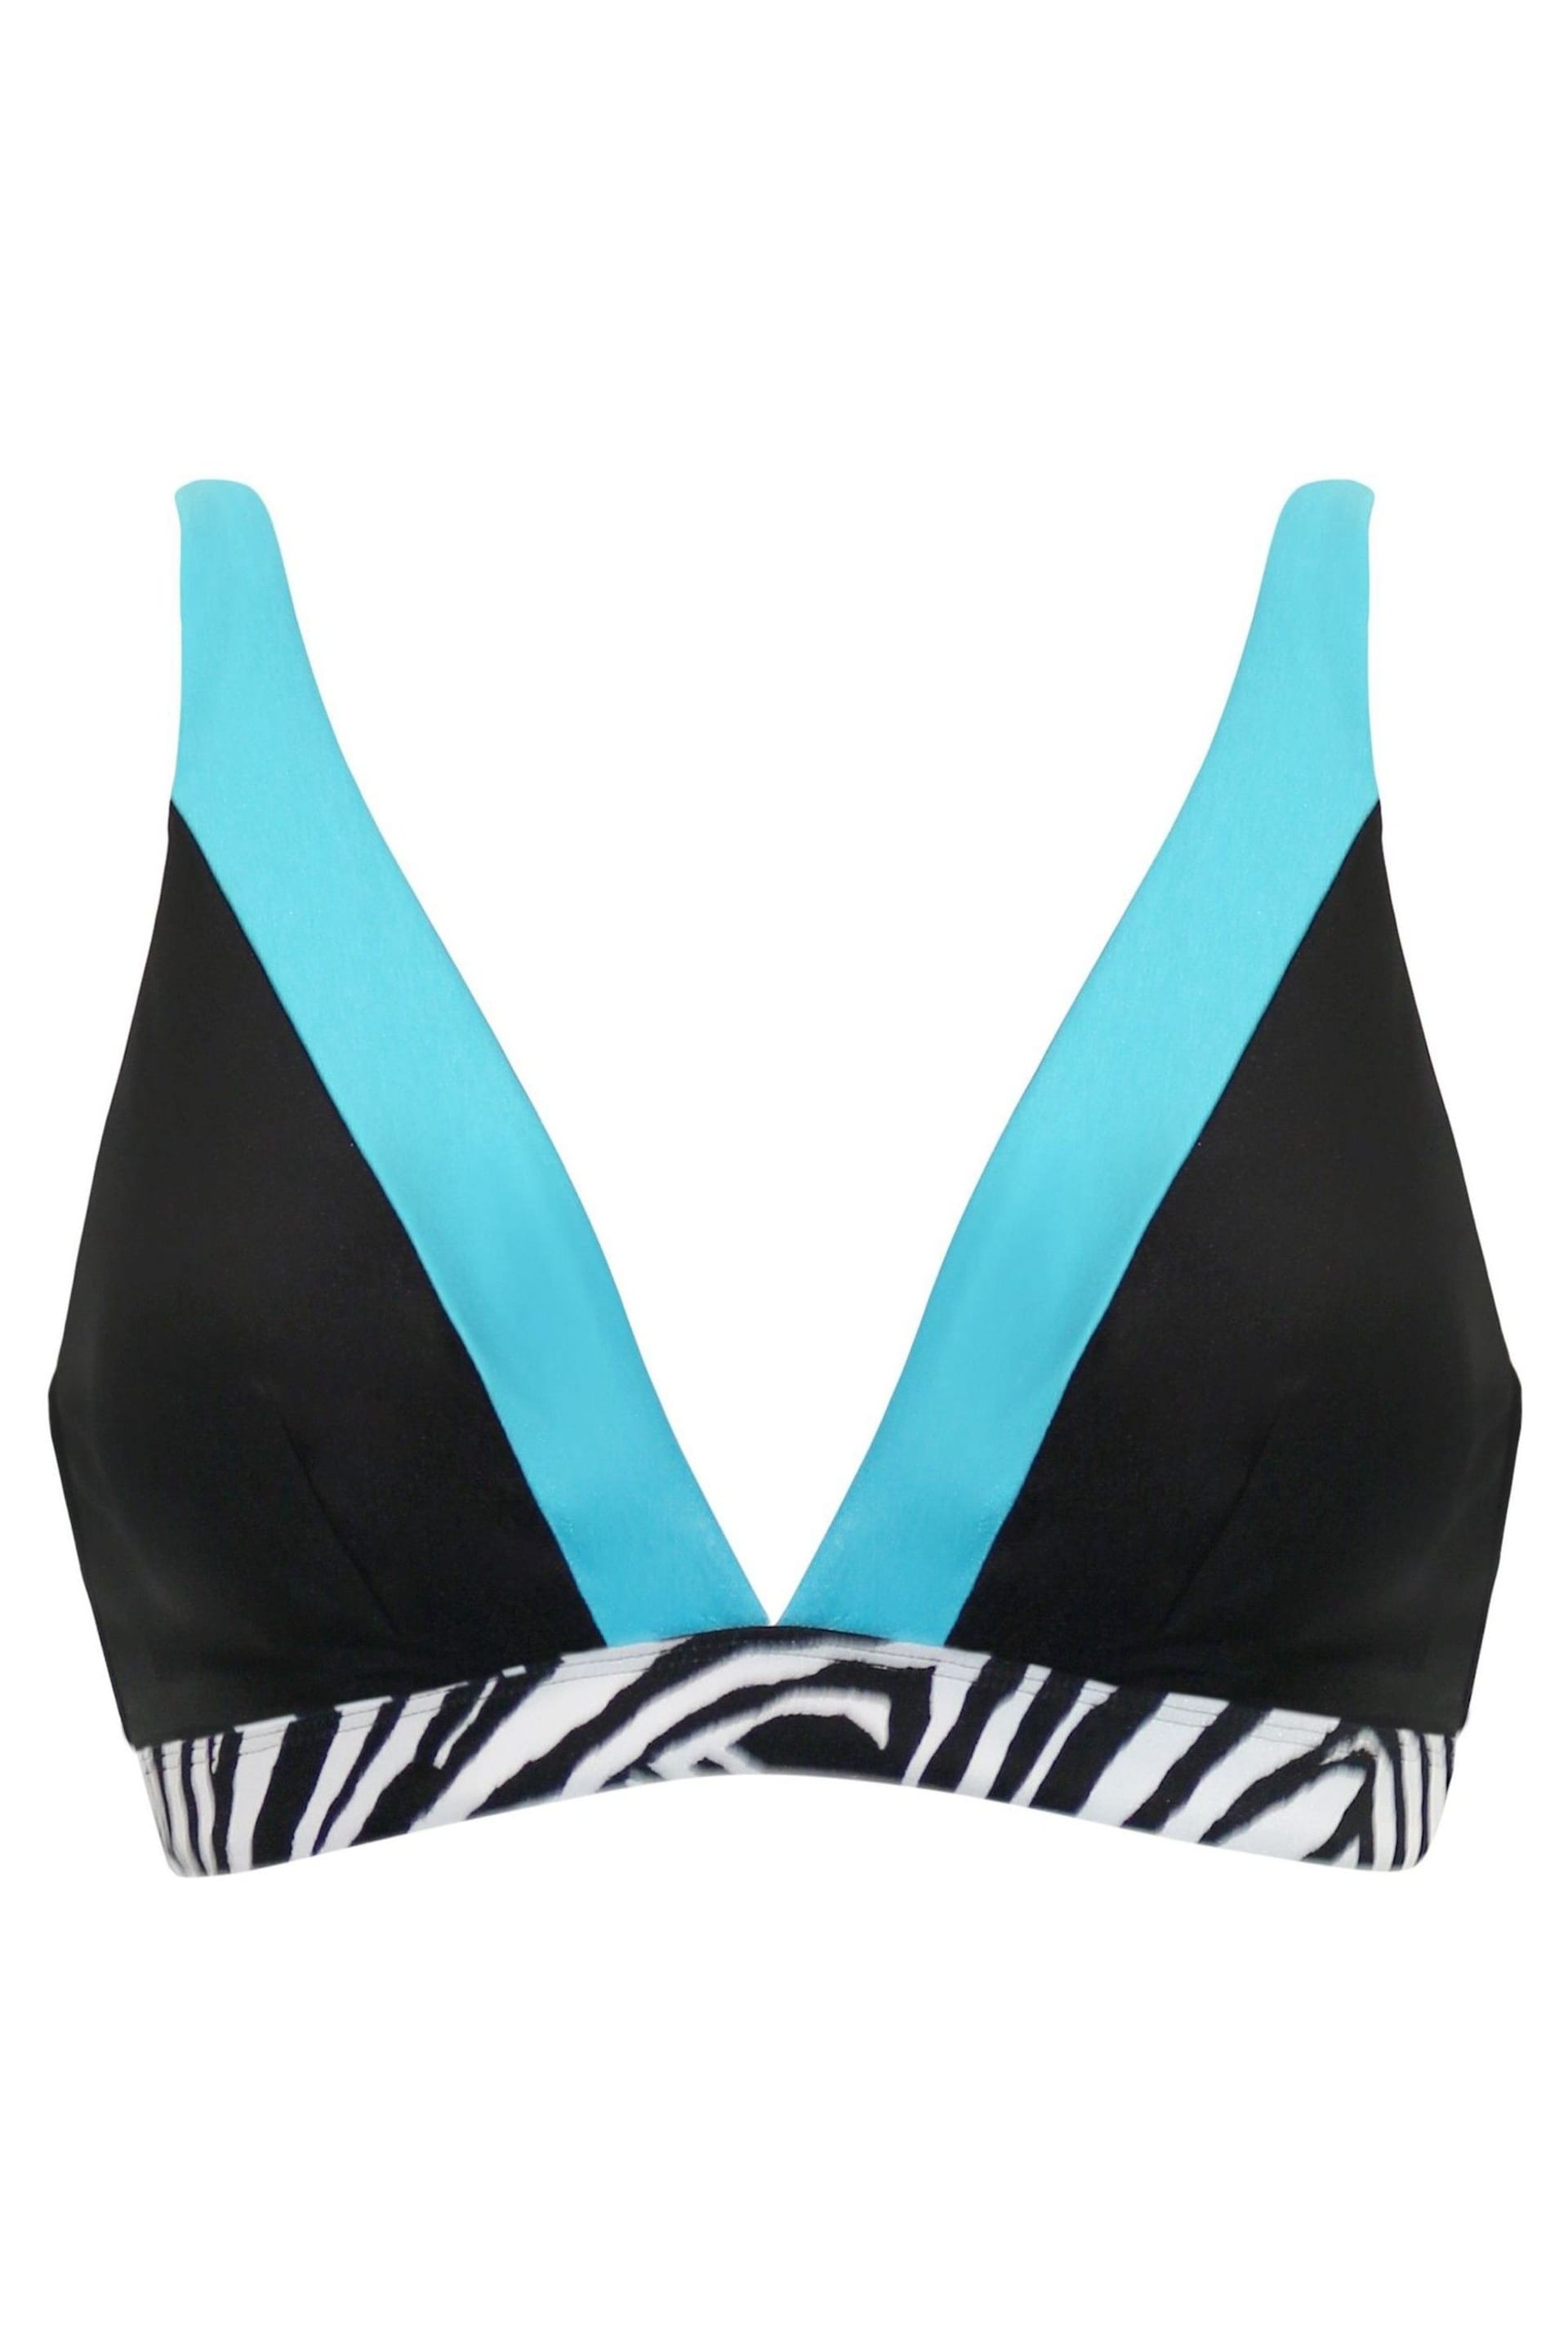 Pour Moi Black & Blue Zebra Print Palm Springs Colour Block Non Wired Top - Image 3 of 4